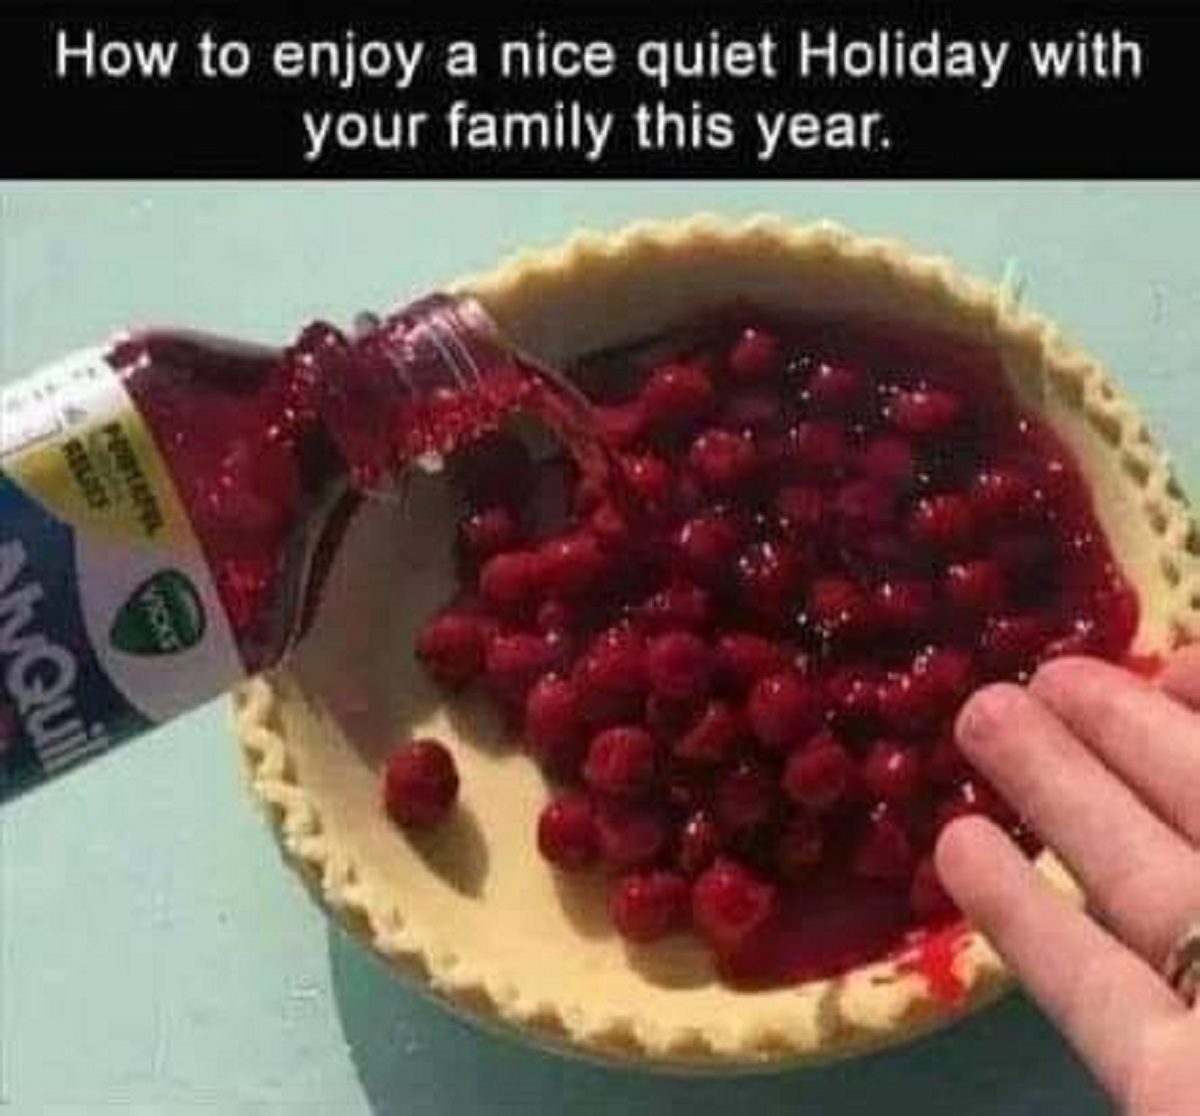 How to enjoy a nice quiet Holiday with your family this year. Quil Vicks